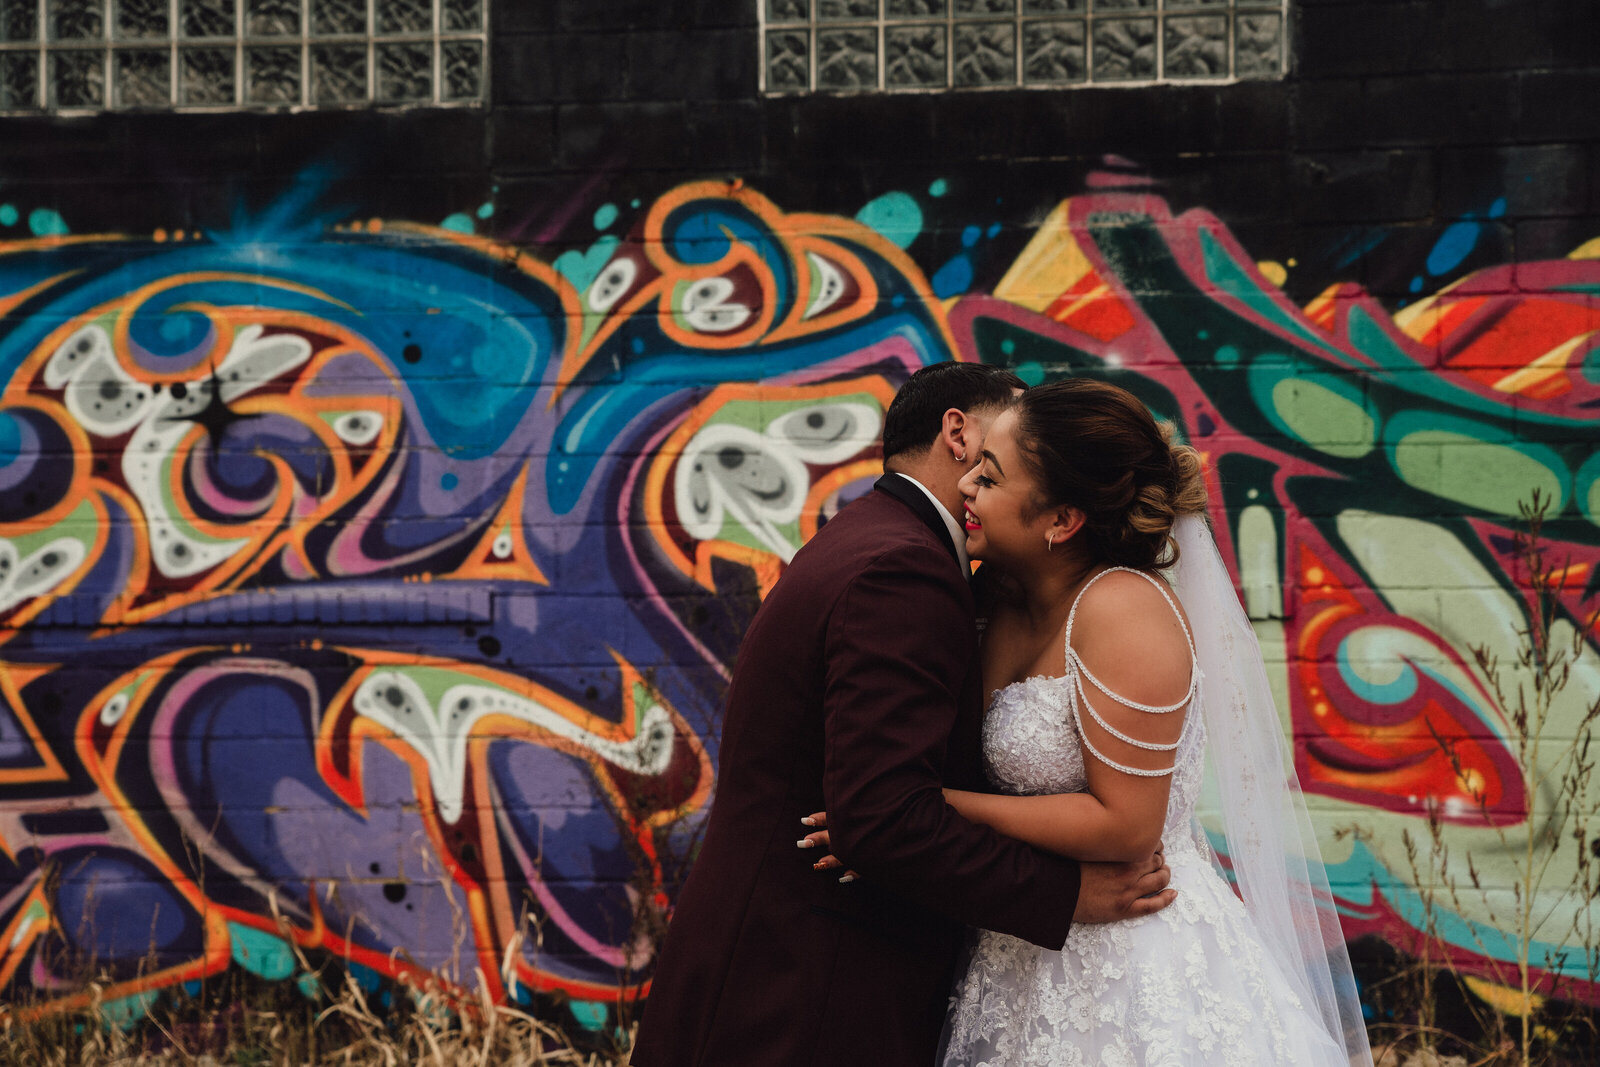 Partners stand in front of Cleveland graffiti on their wedding day.